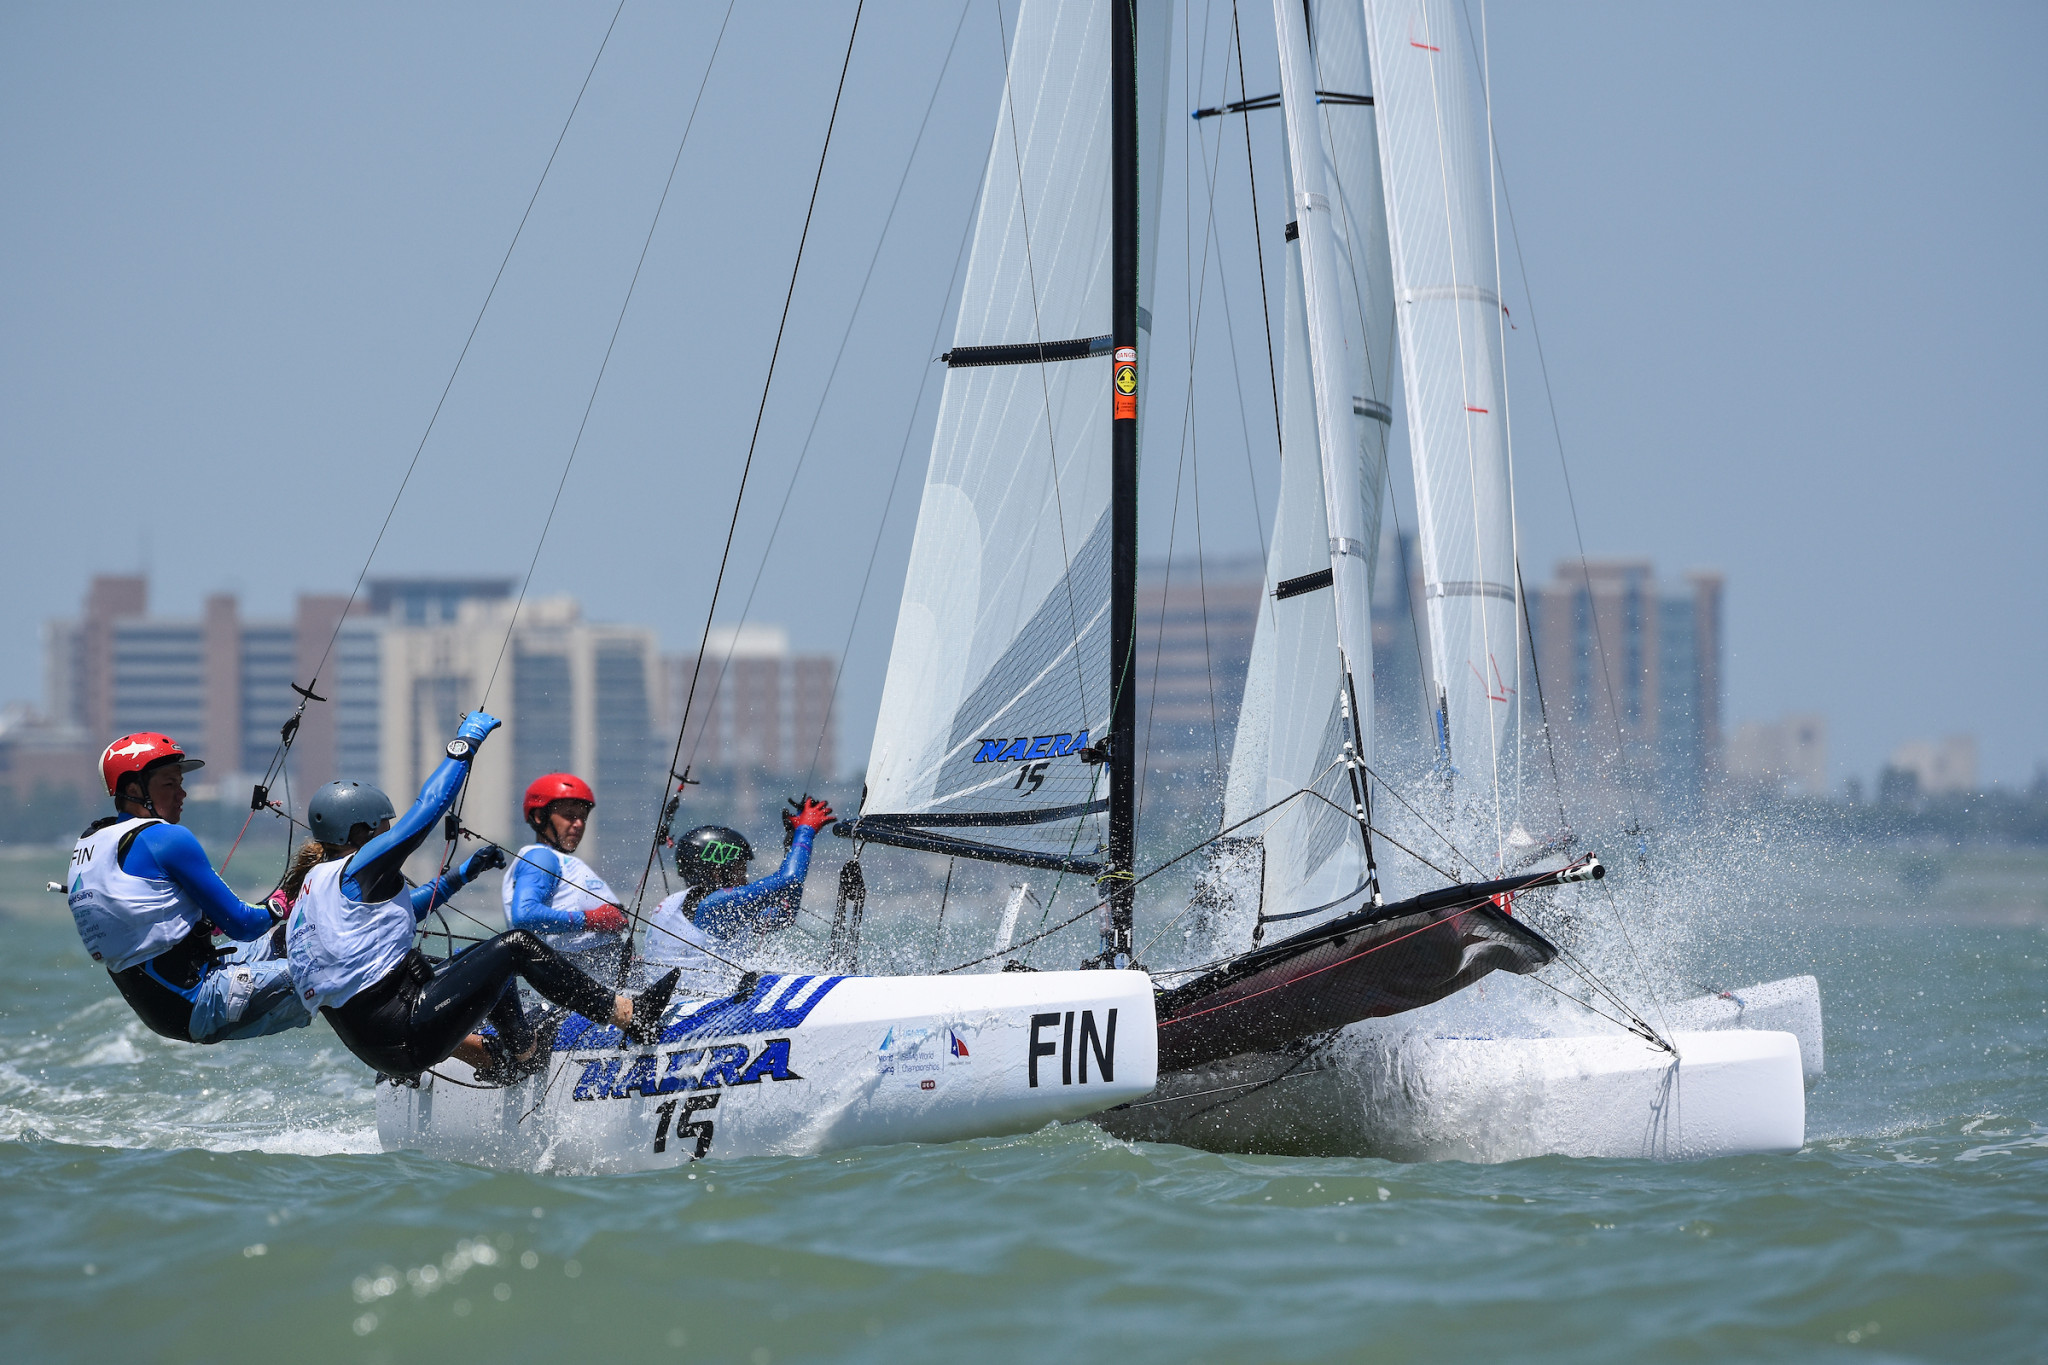 World Sailing working with interested nations on staging 2021 Youth Sailing World Championships